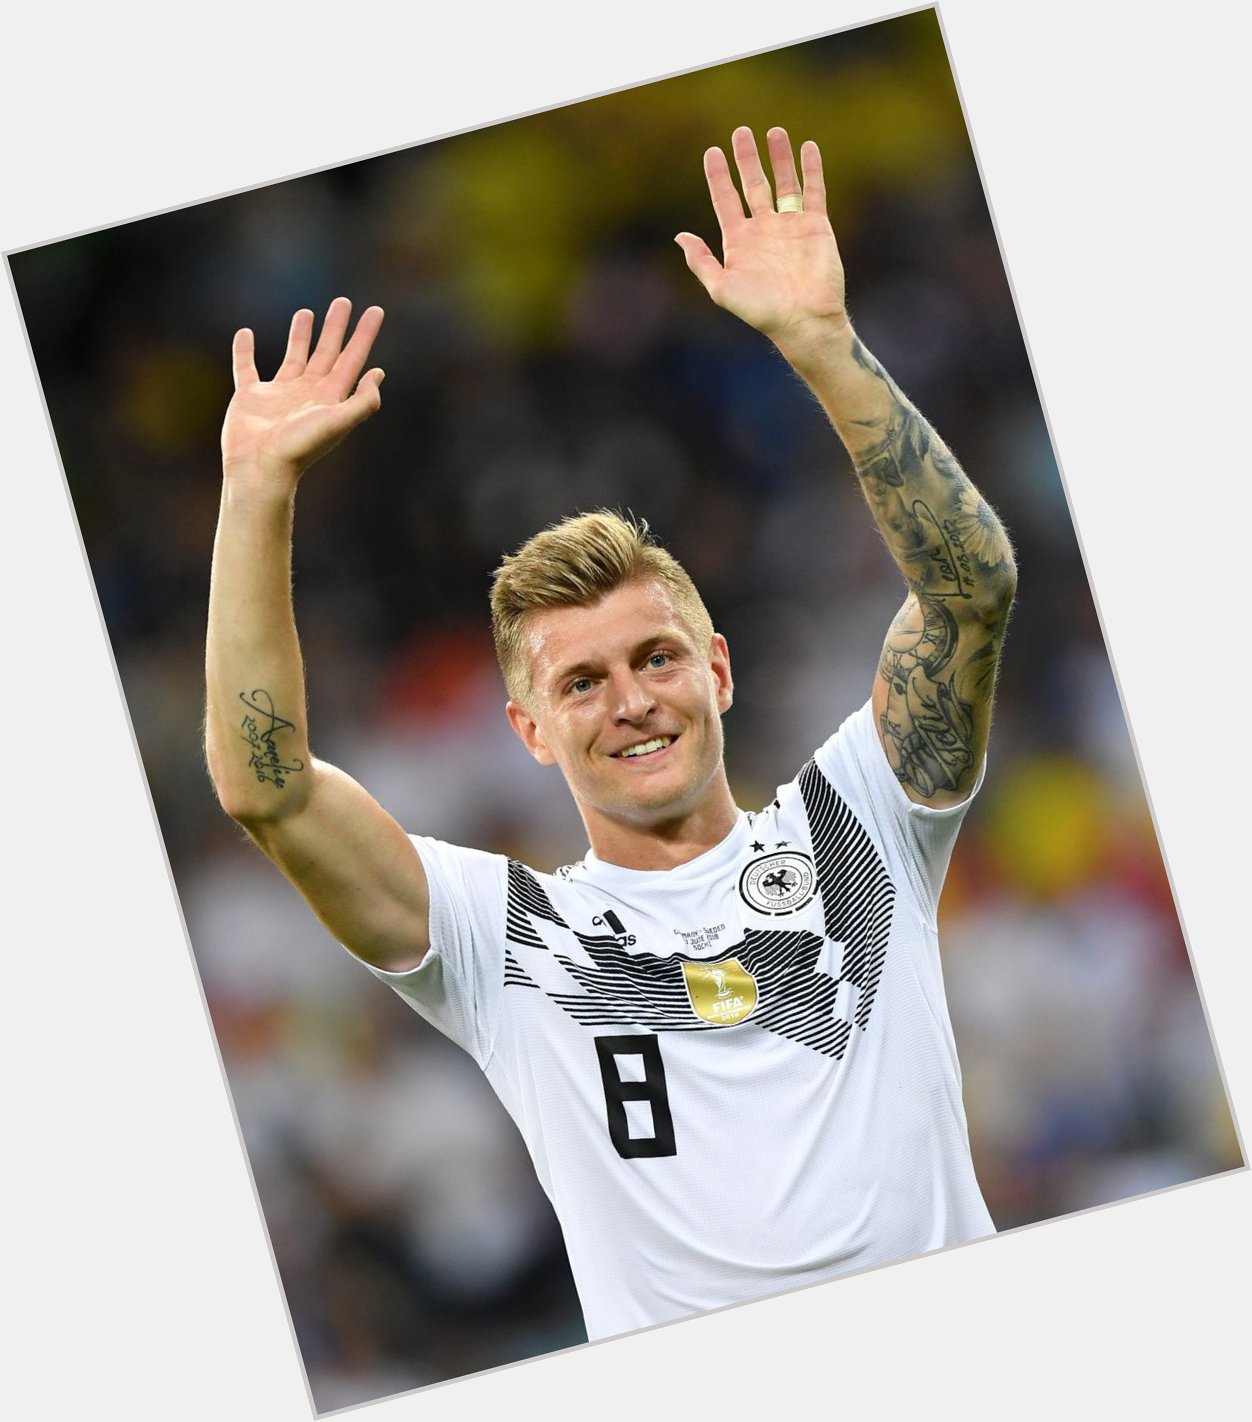  World Cup Champion 5x UCL Champion One of the best No. 8s to ever lace \em up

Happy Birthday, Toni Kroos! 